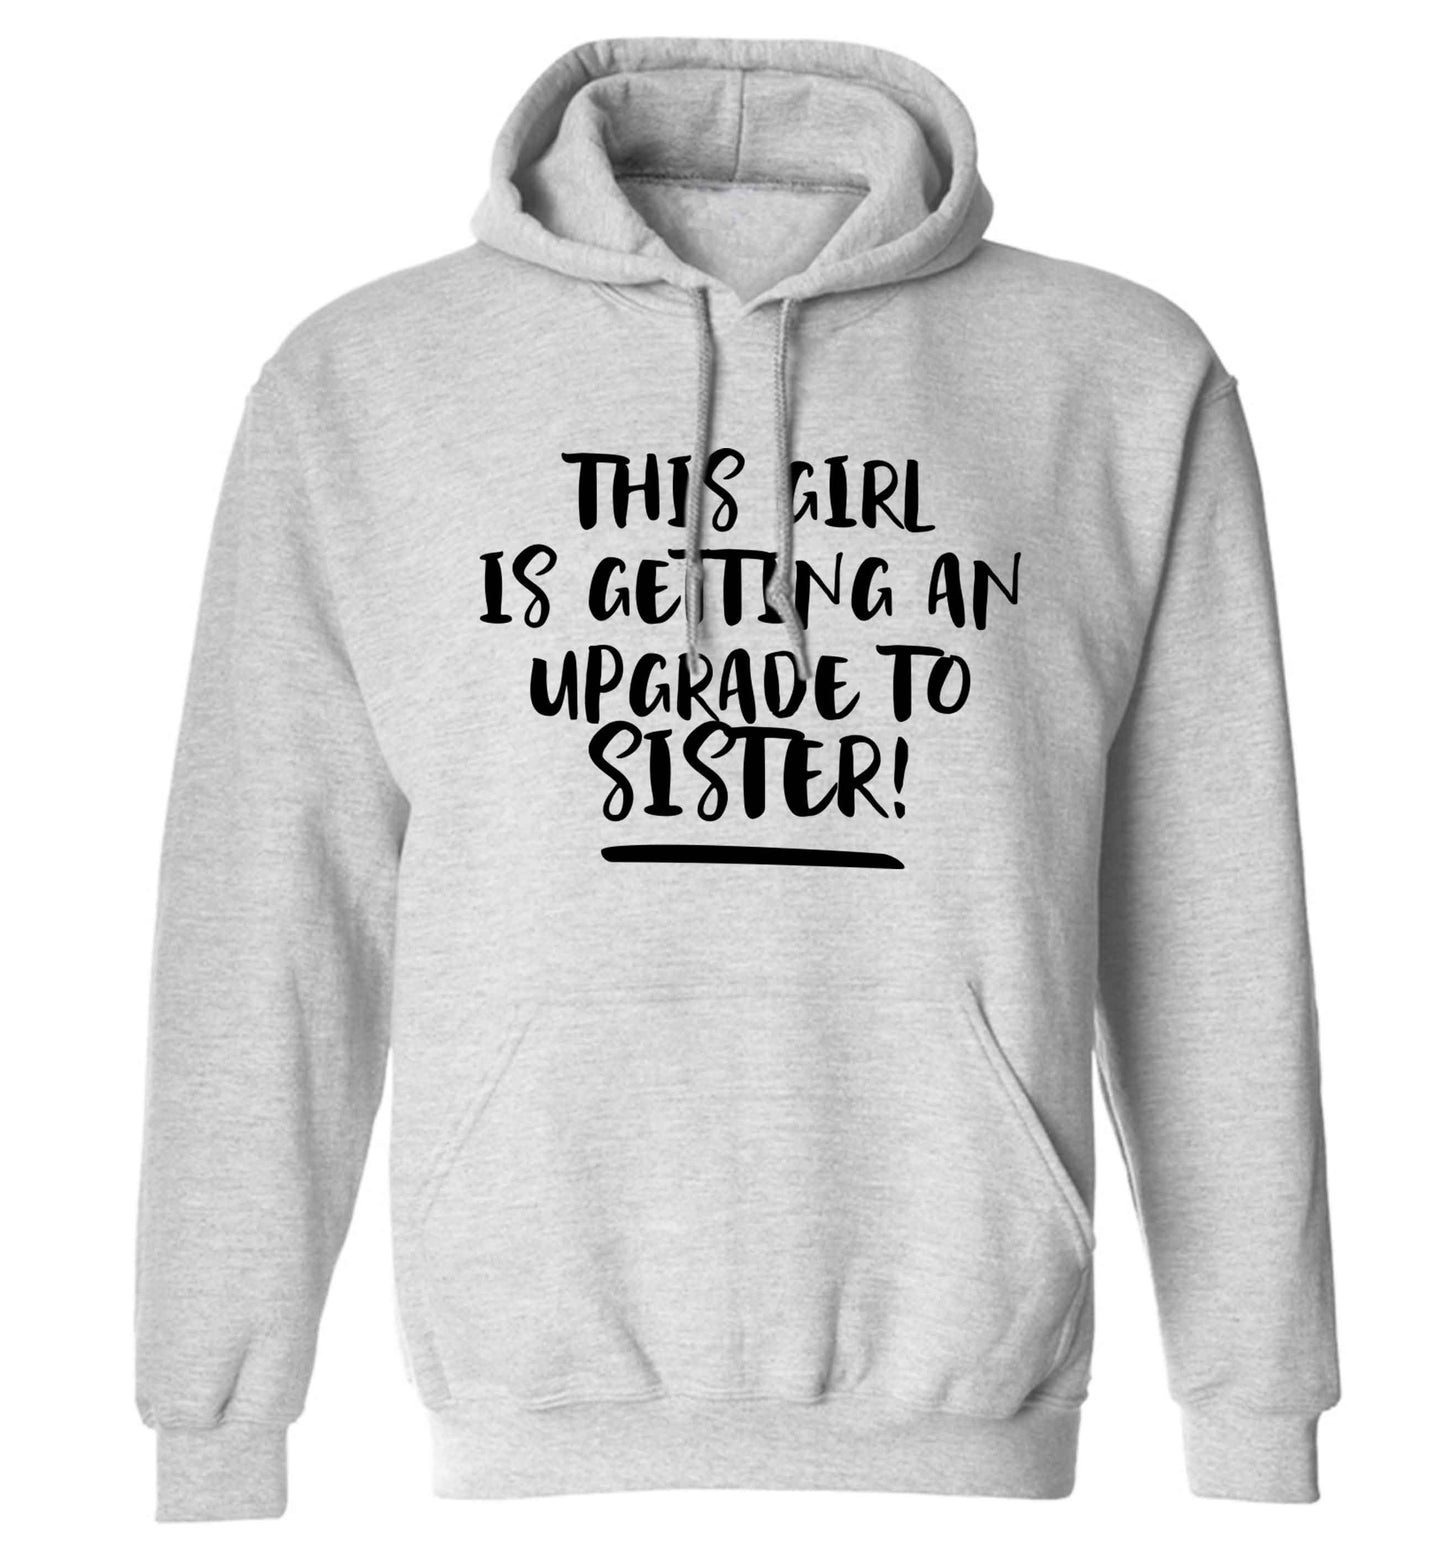 This girl is getting an upgrade to sister! adults unisex grey hoodie 2XL